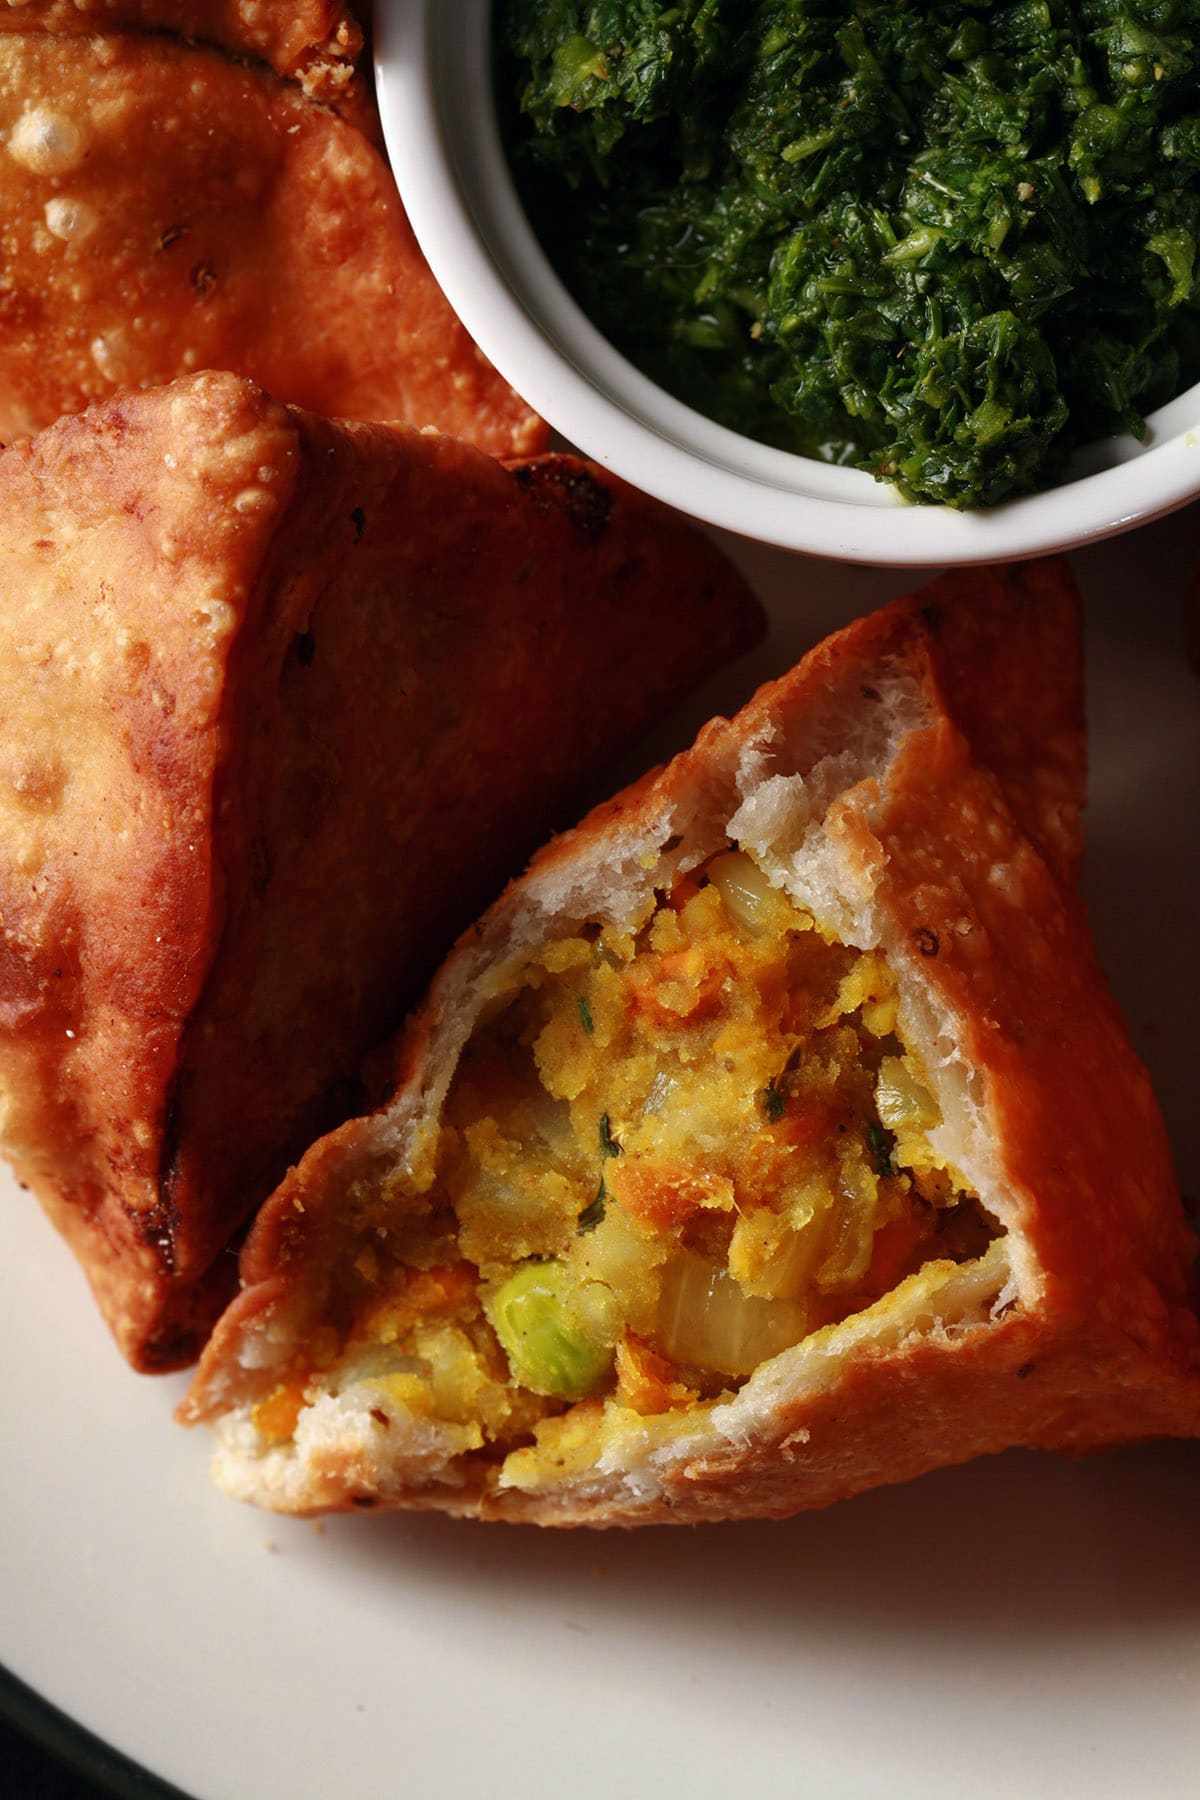 A plate of homemade vegetarian samosas, with a small bowl of cilantro mint chutney.